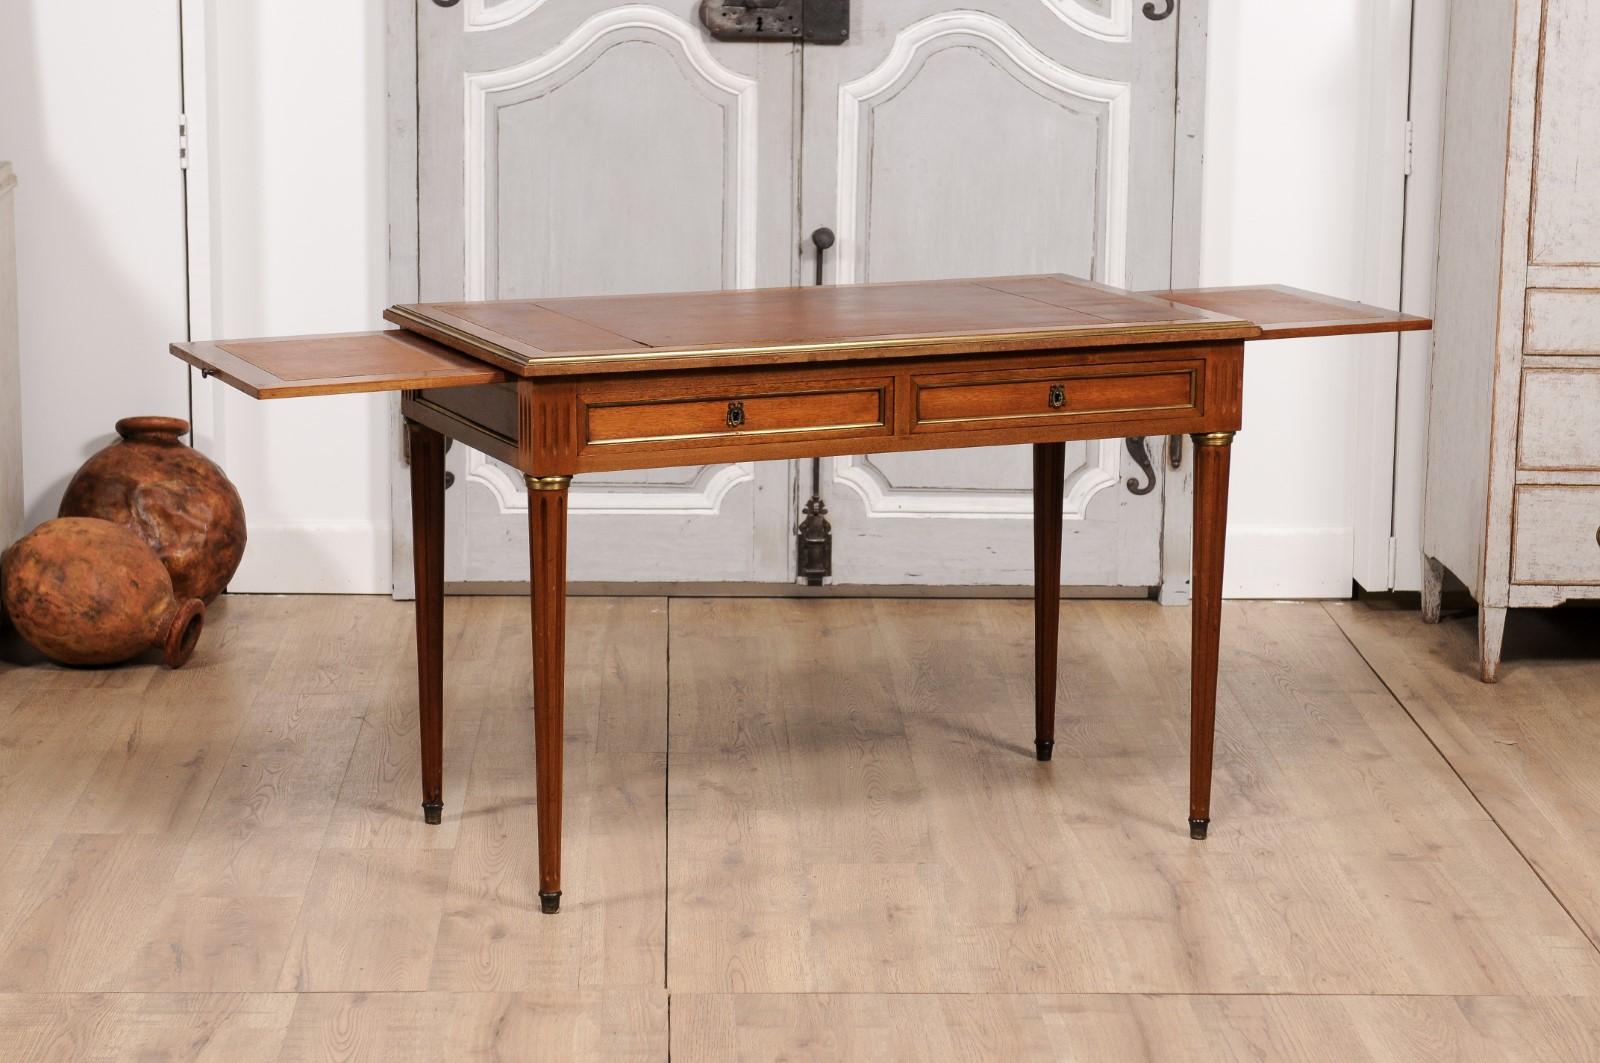 20th Century Louis XVI Style French Walnut Desk with Leather Top and Carved Fluted Legs